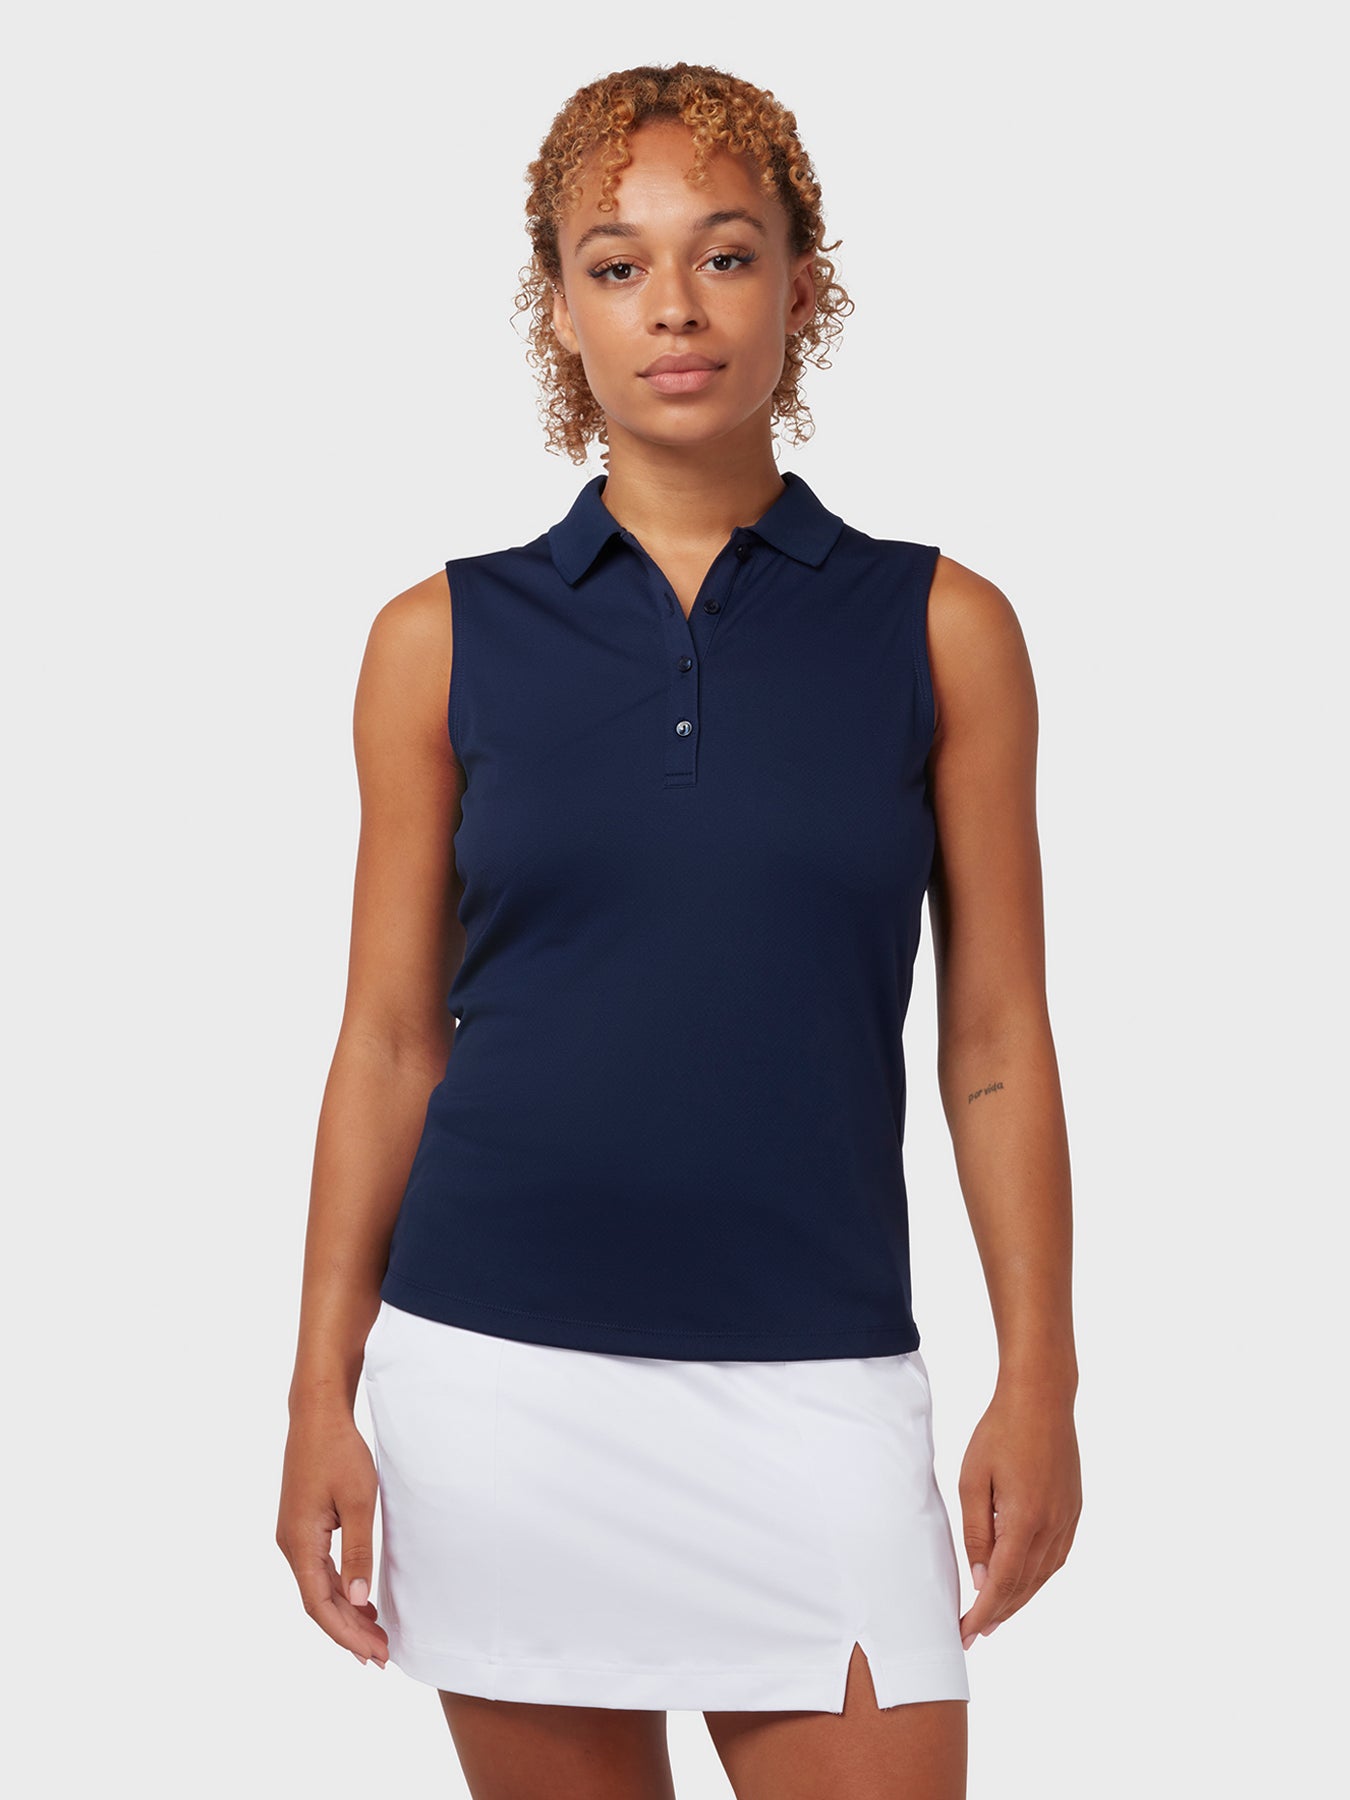 View Sleeveless Womens Polo In Peacoat Peacoat L information